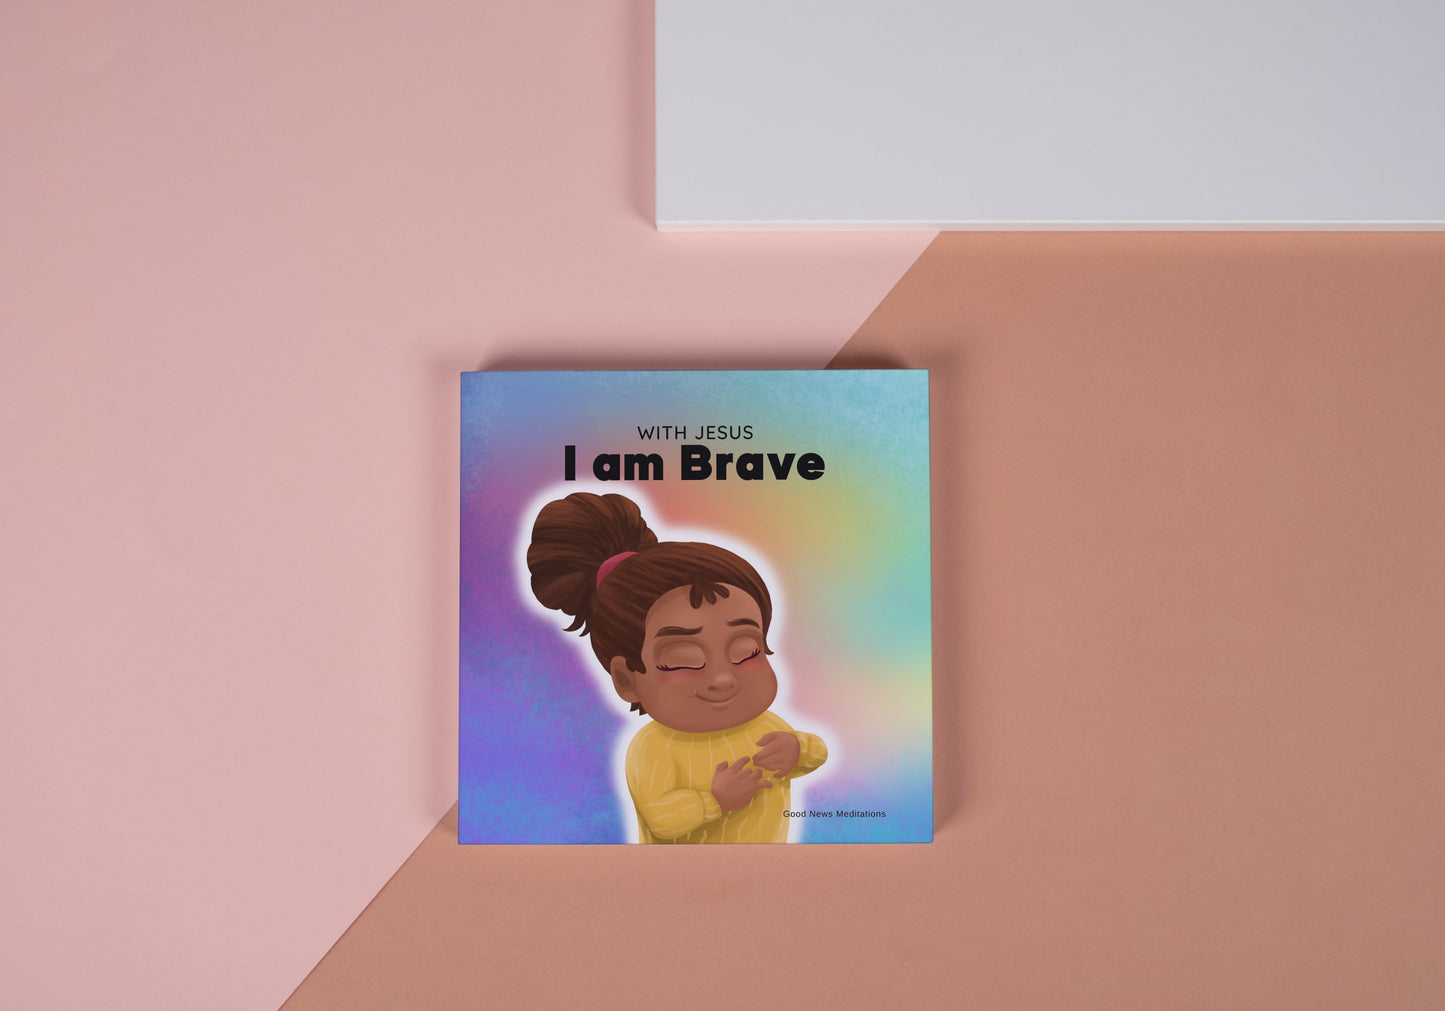 With Jesus I am Brave - Printed in the UK